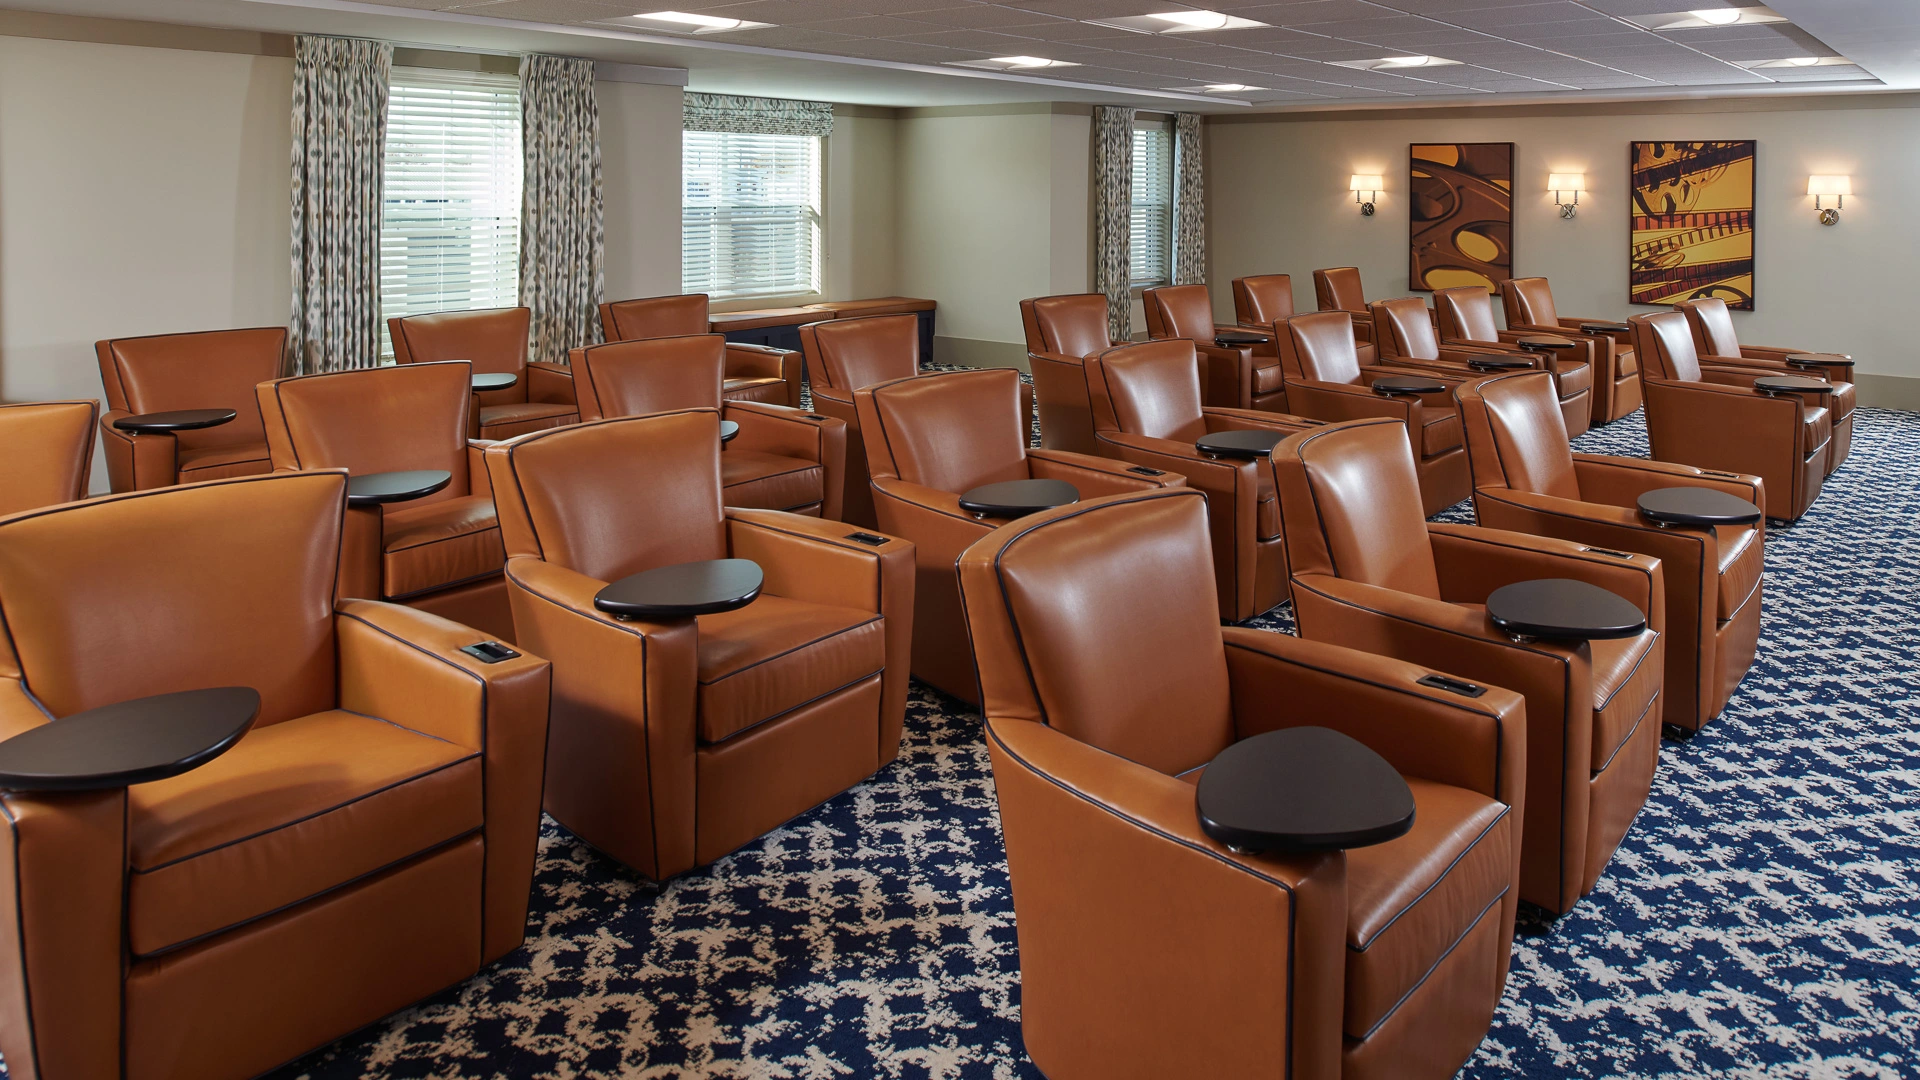 A theater at a senior living community at American House in Bloomfield Hills, MI